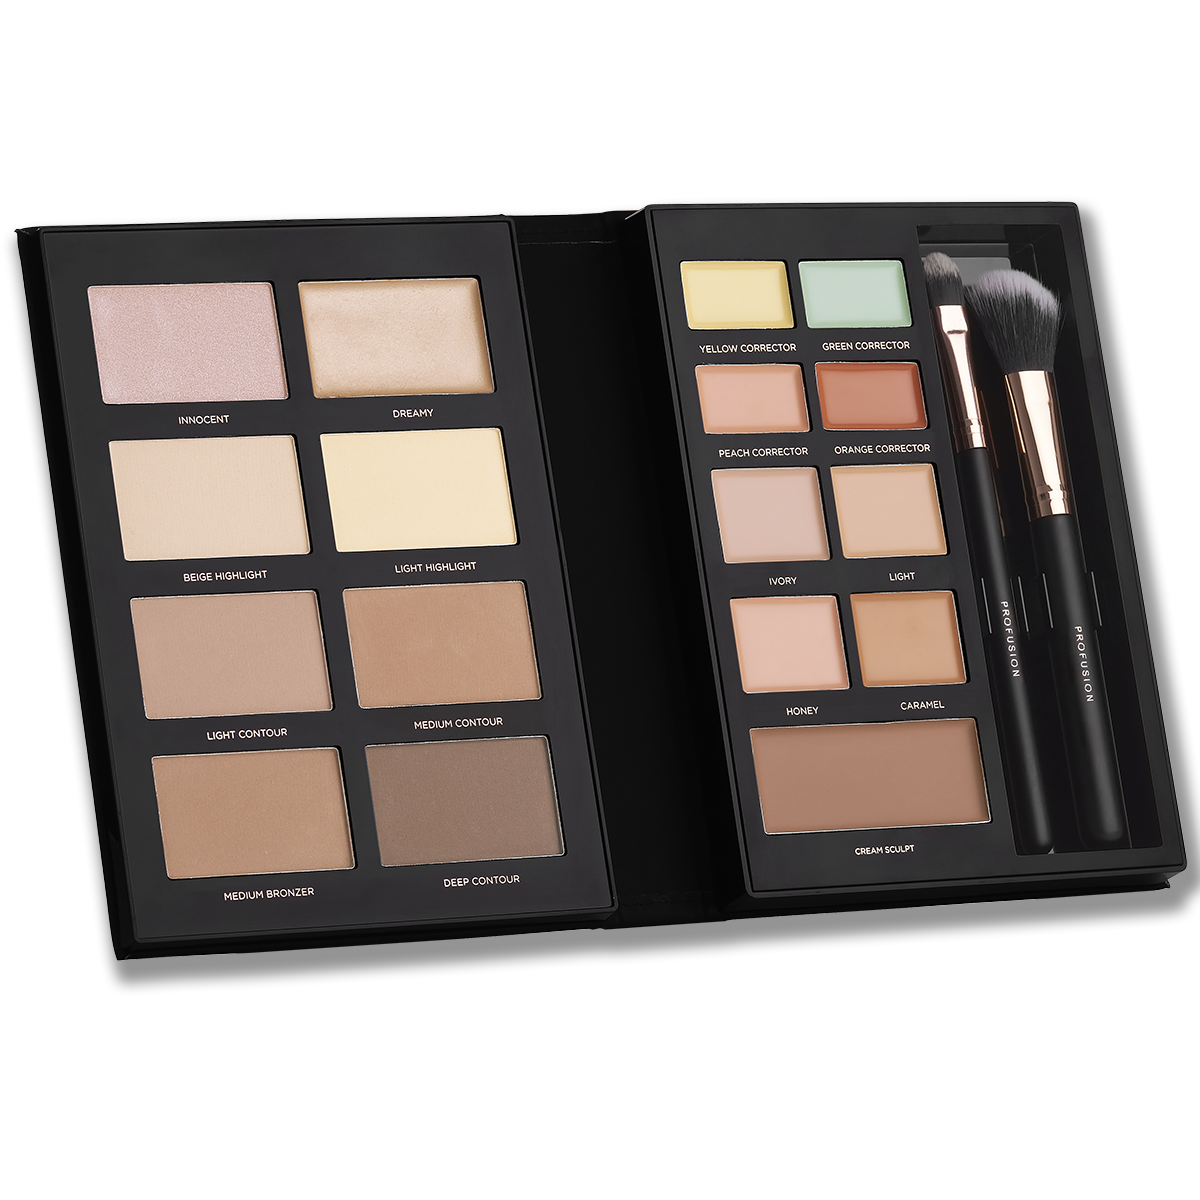 PRO CONCEAL & CONTOUR | Professional Beauty Book - profusion US